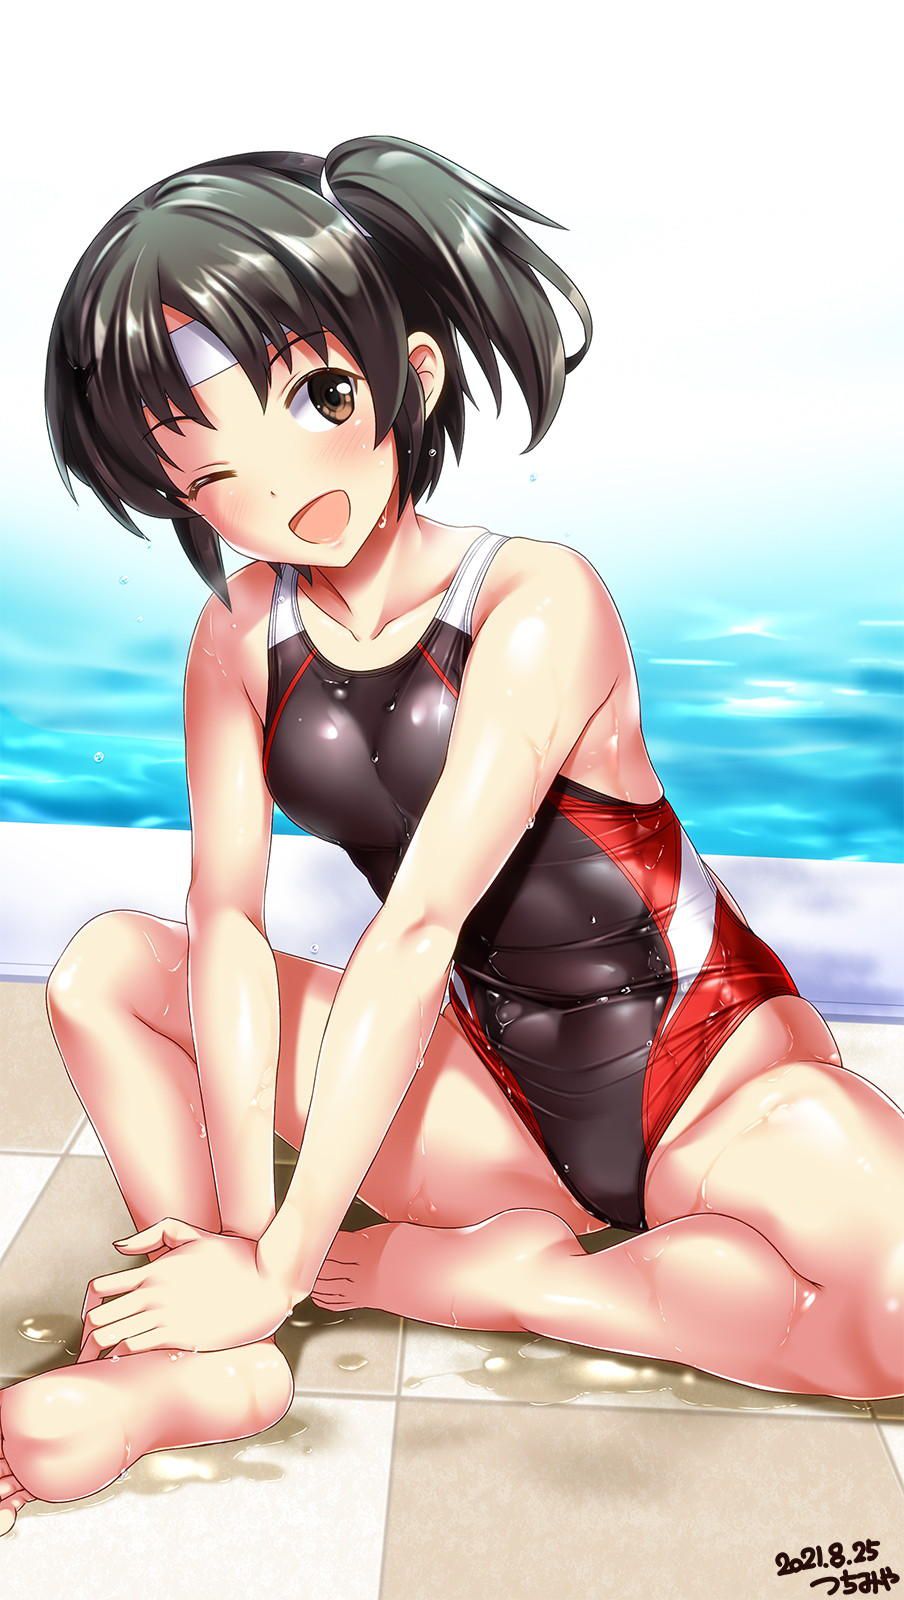 I'm going to put up an erotic cute image of a swimsuit! 9